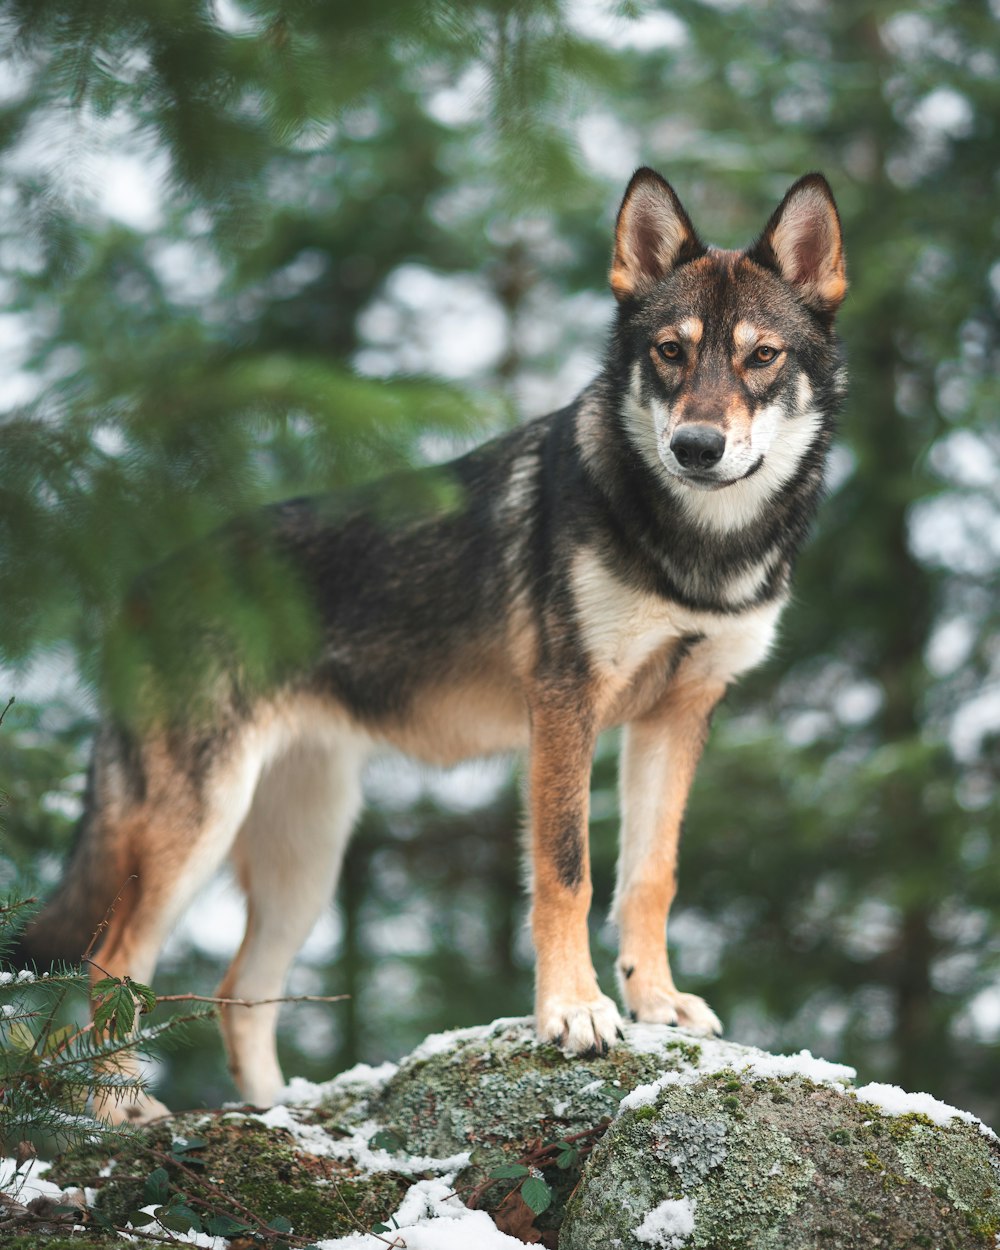 wolf standing on rock formation